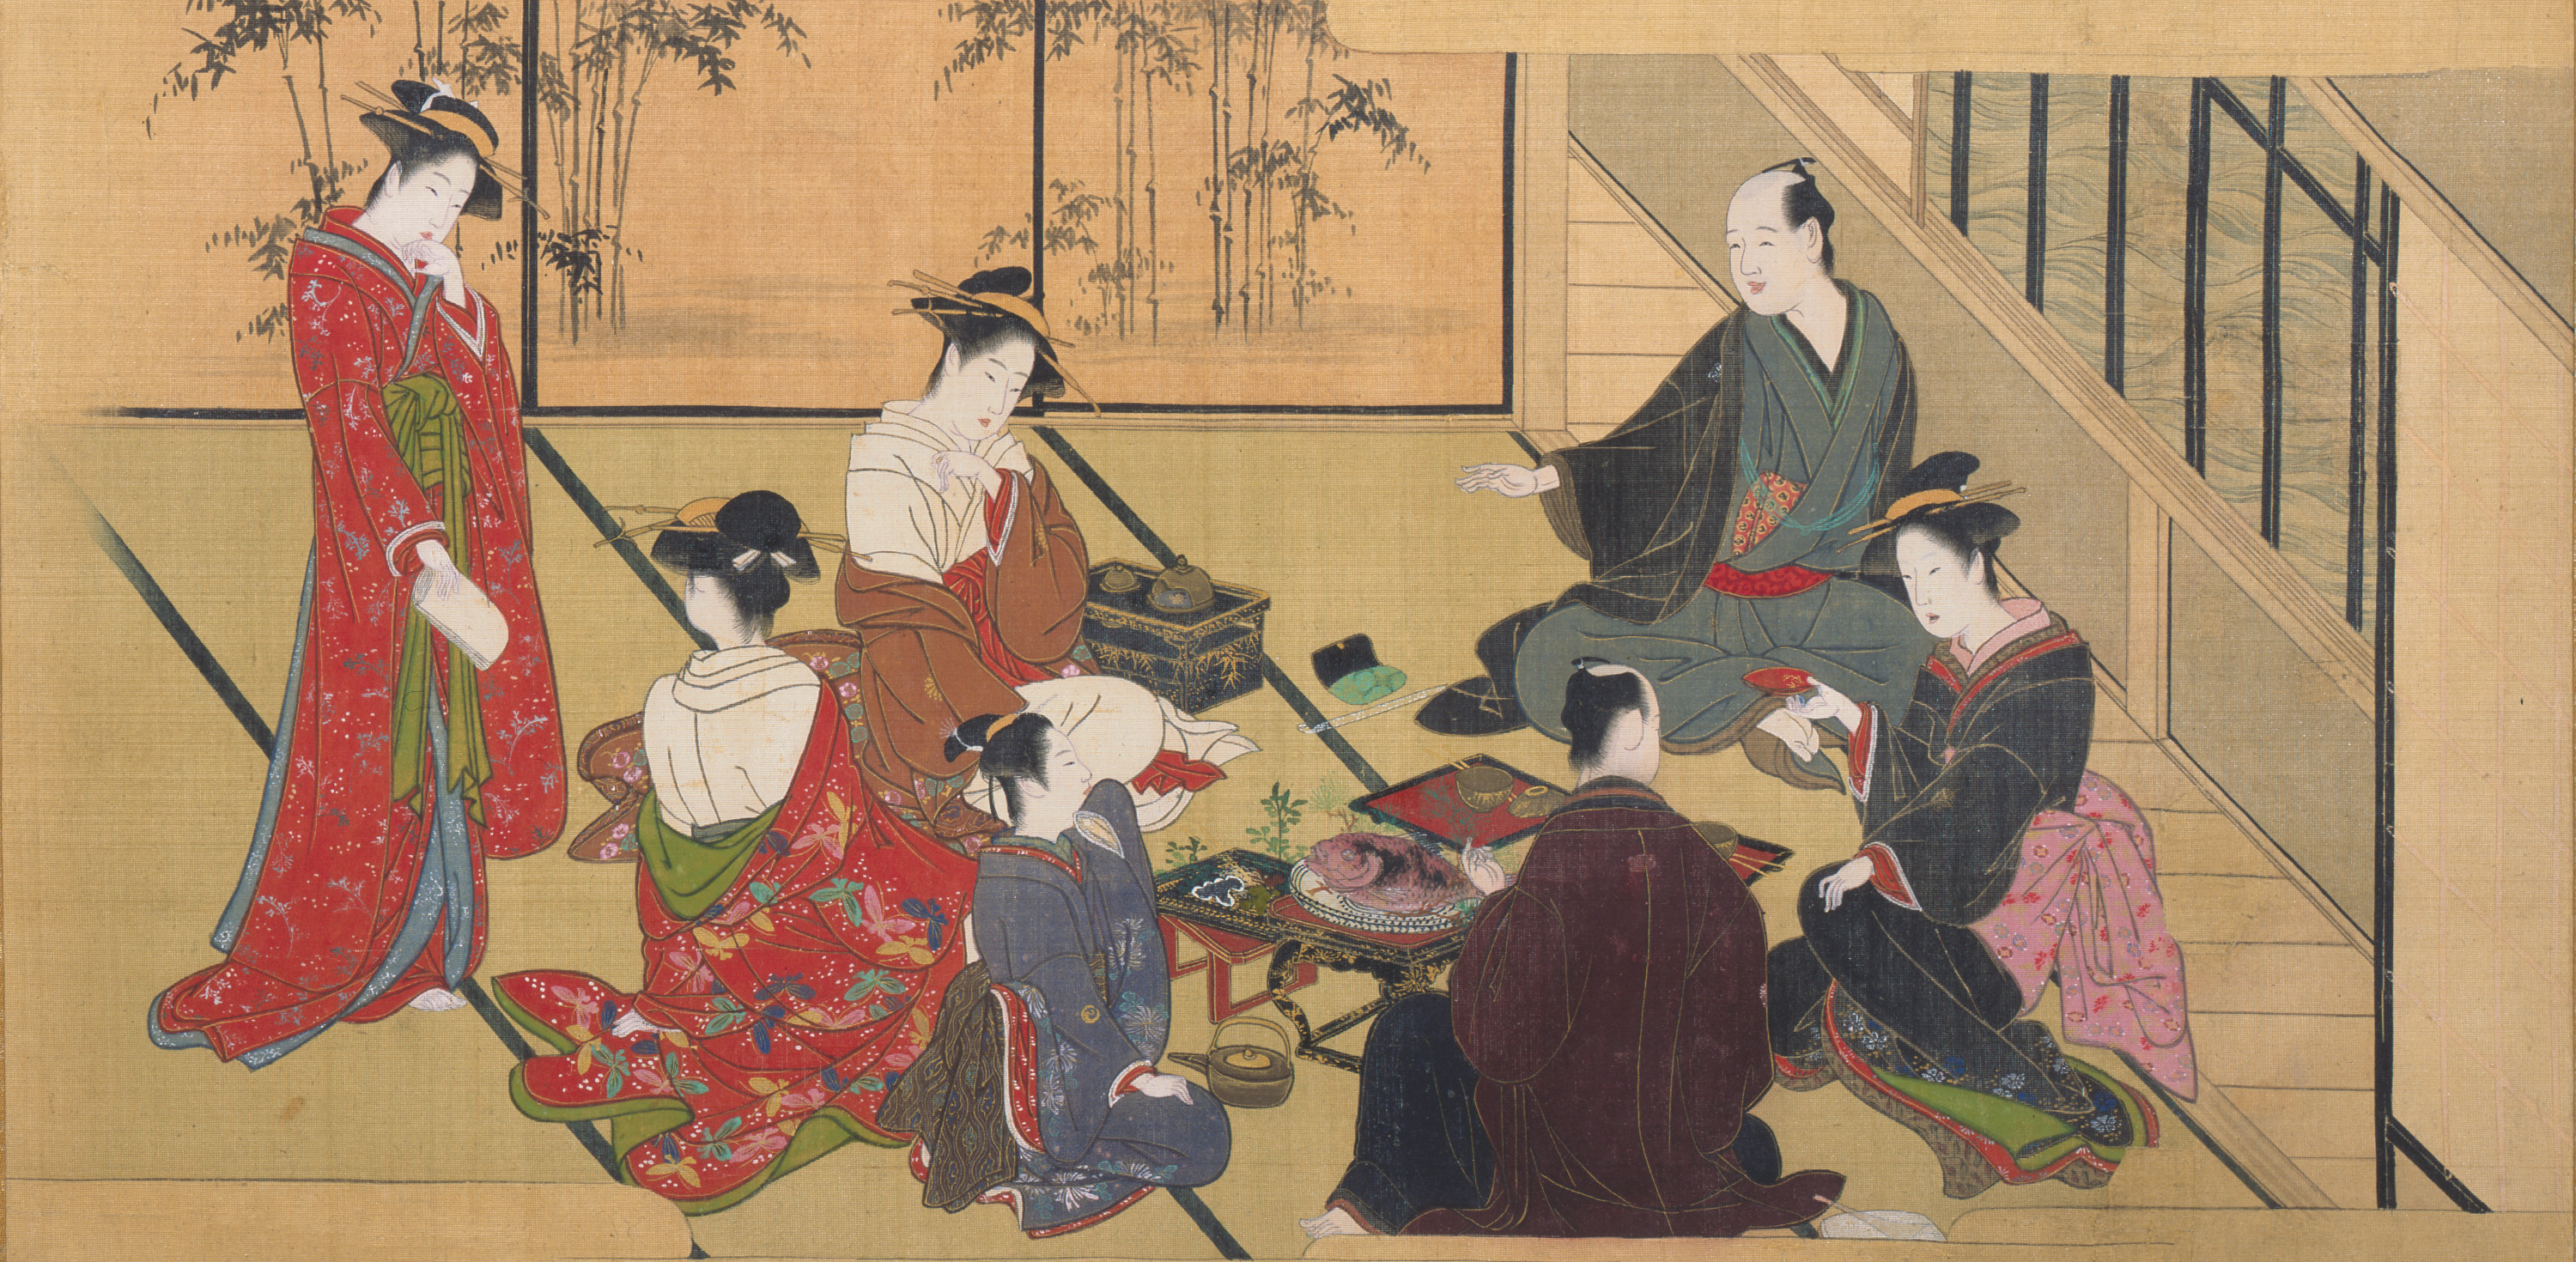 <p><strong>Katsukawa Shunsho,&nbsp;</strong><em>Banquet at the Green House</em>, circa 1788, hanging scroll, ink and colour on silk, courtesy Sumisho Art Gallery.&nbsp;</p>
